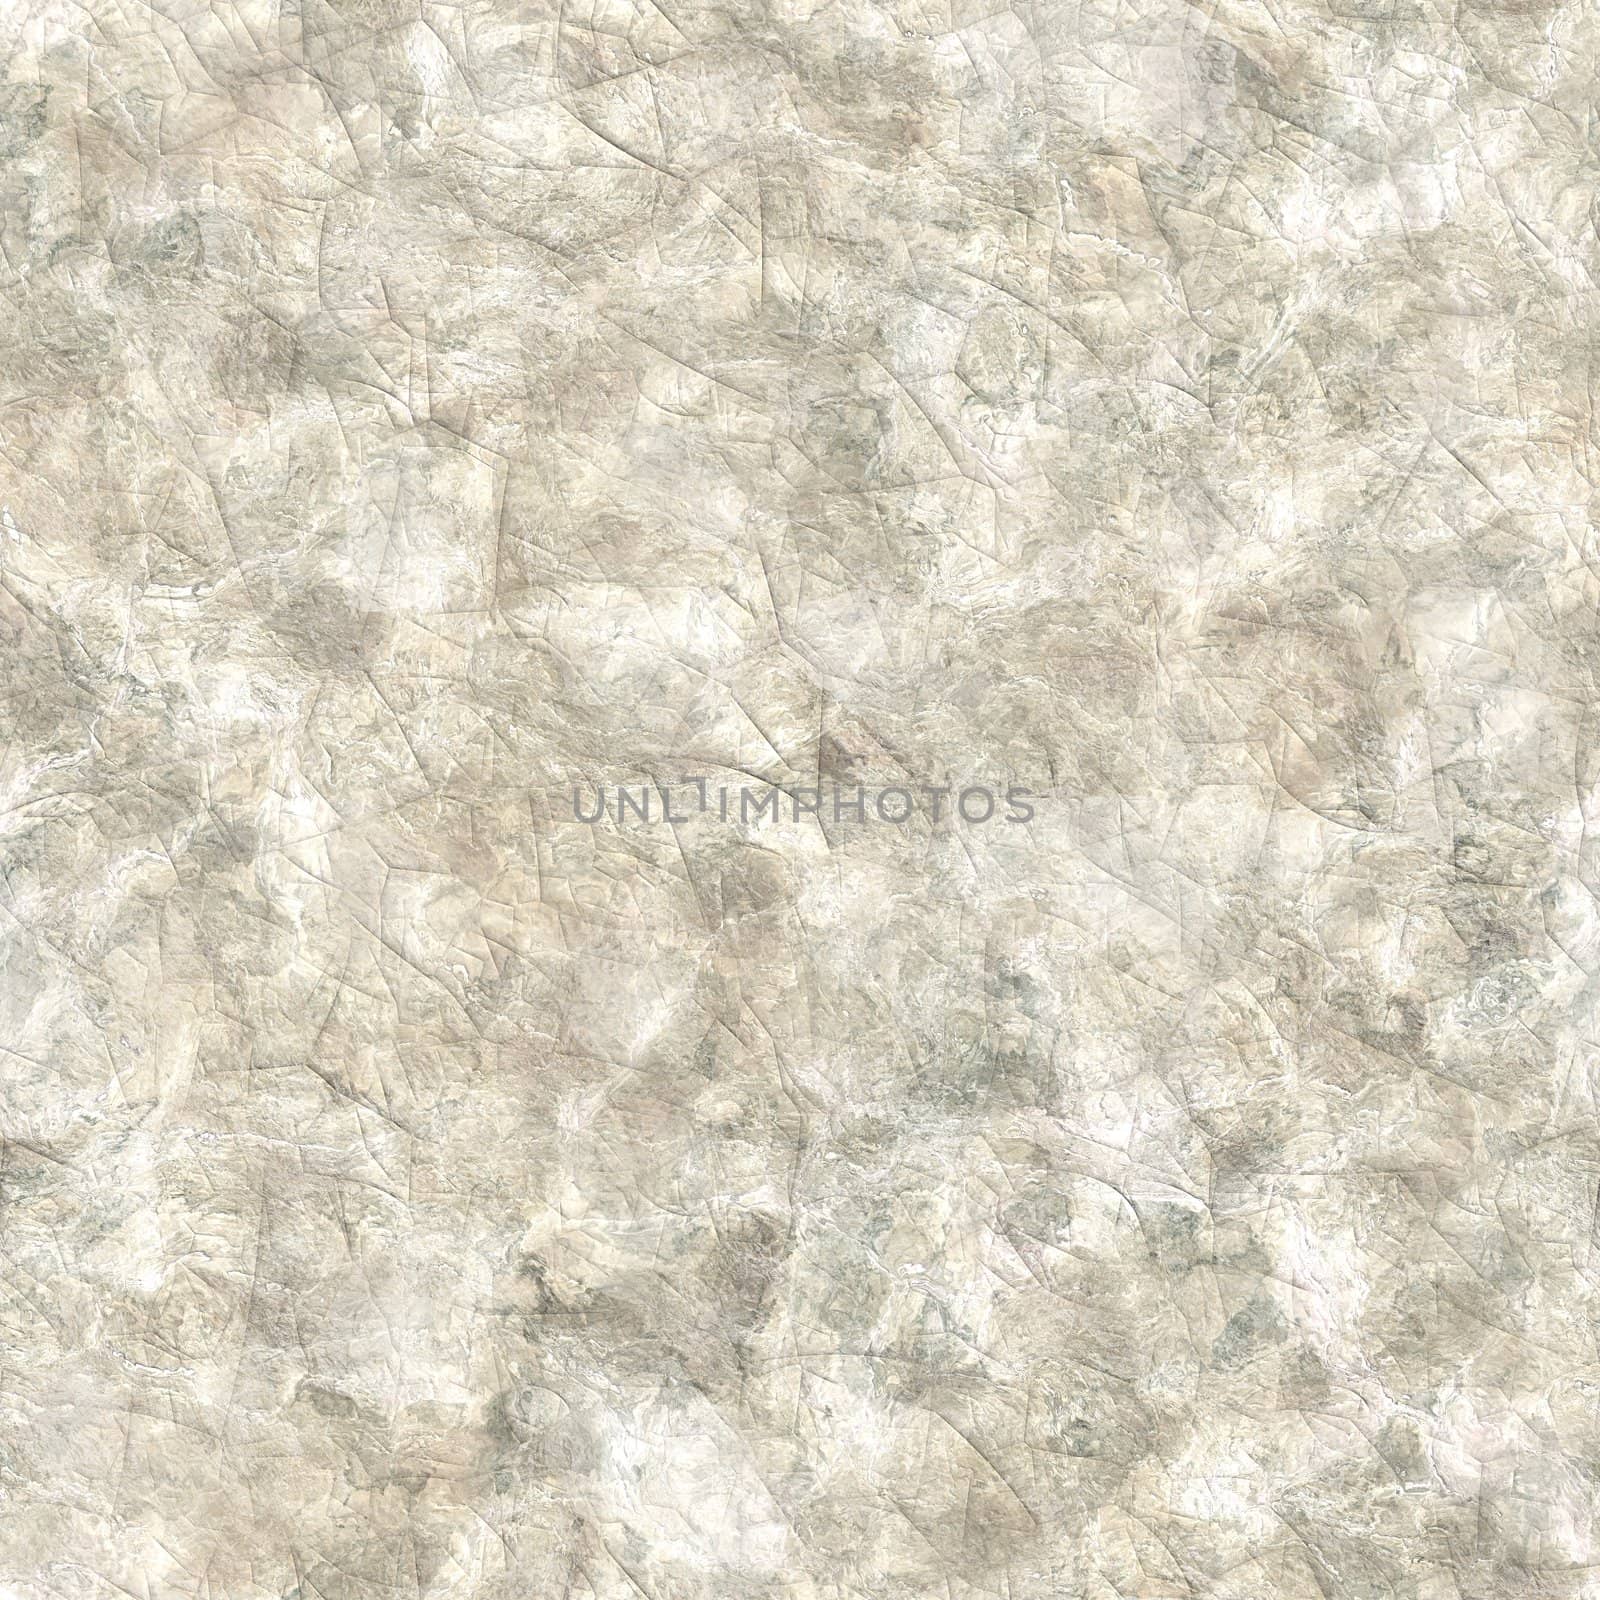 The marble texture. The sulphur-brown marble